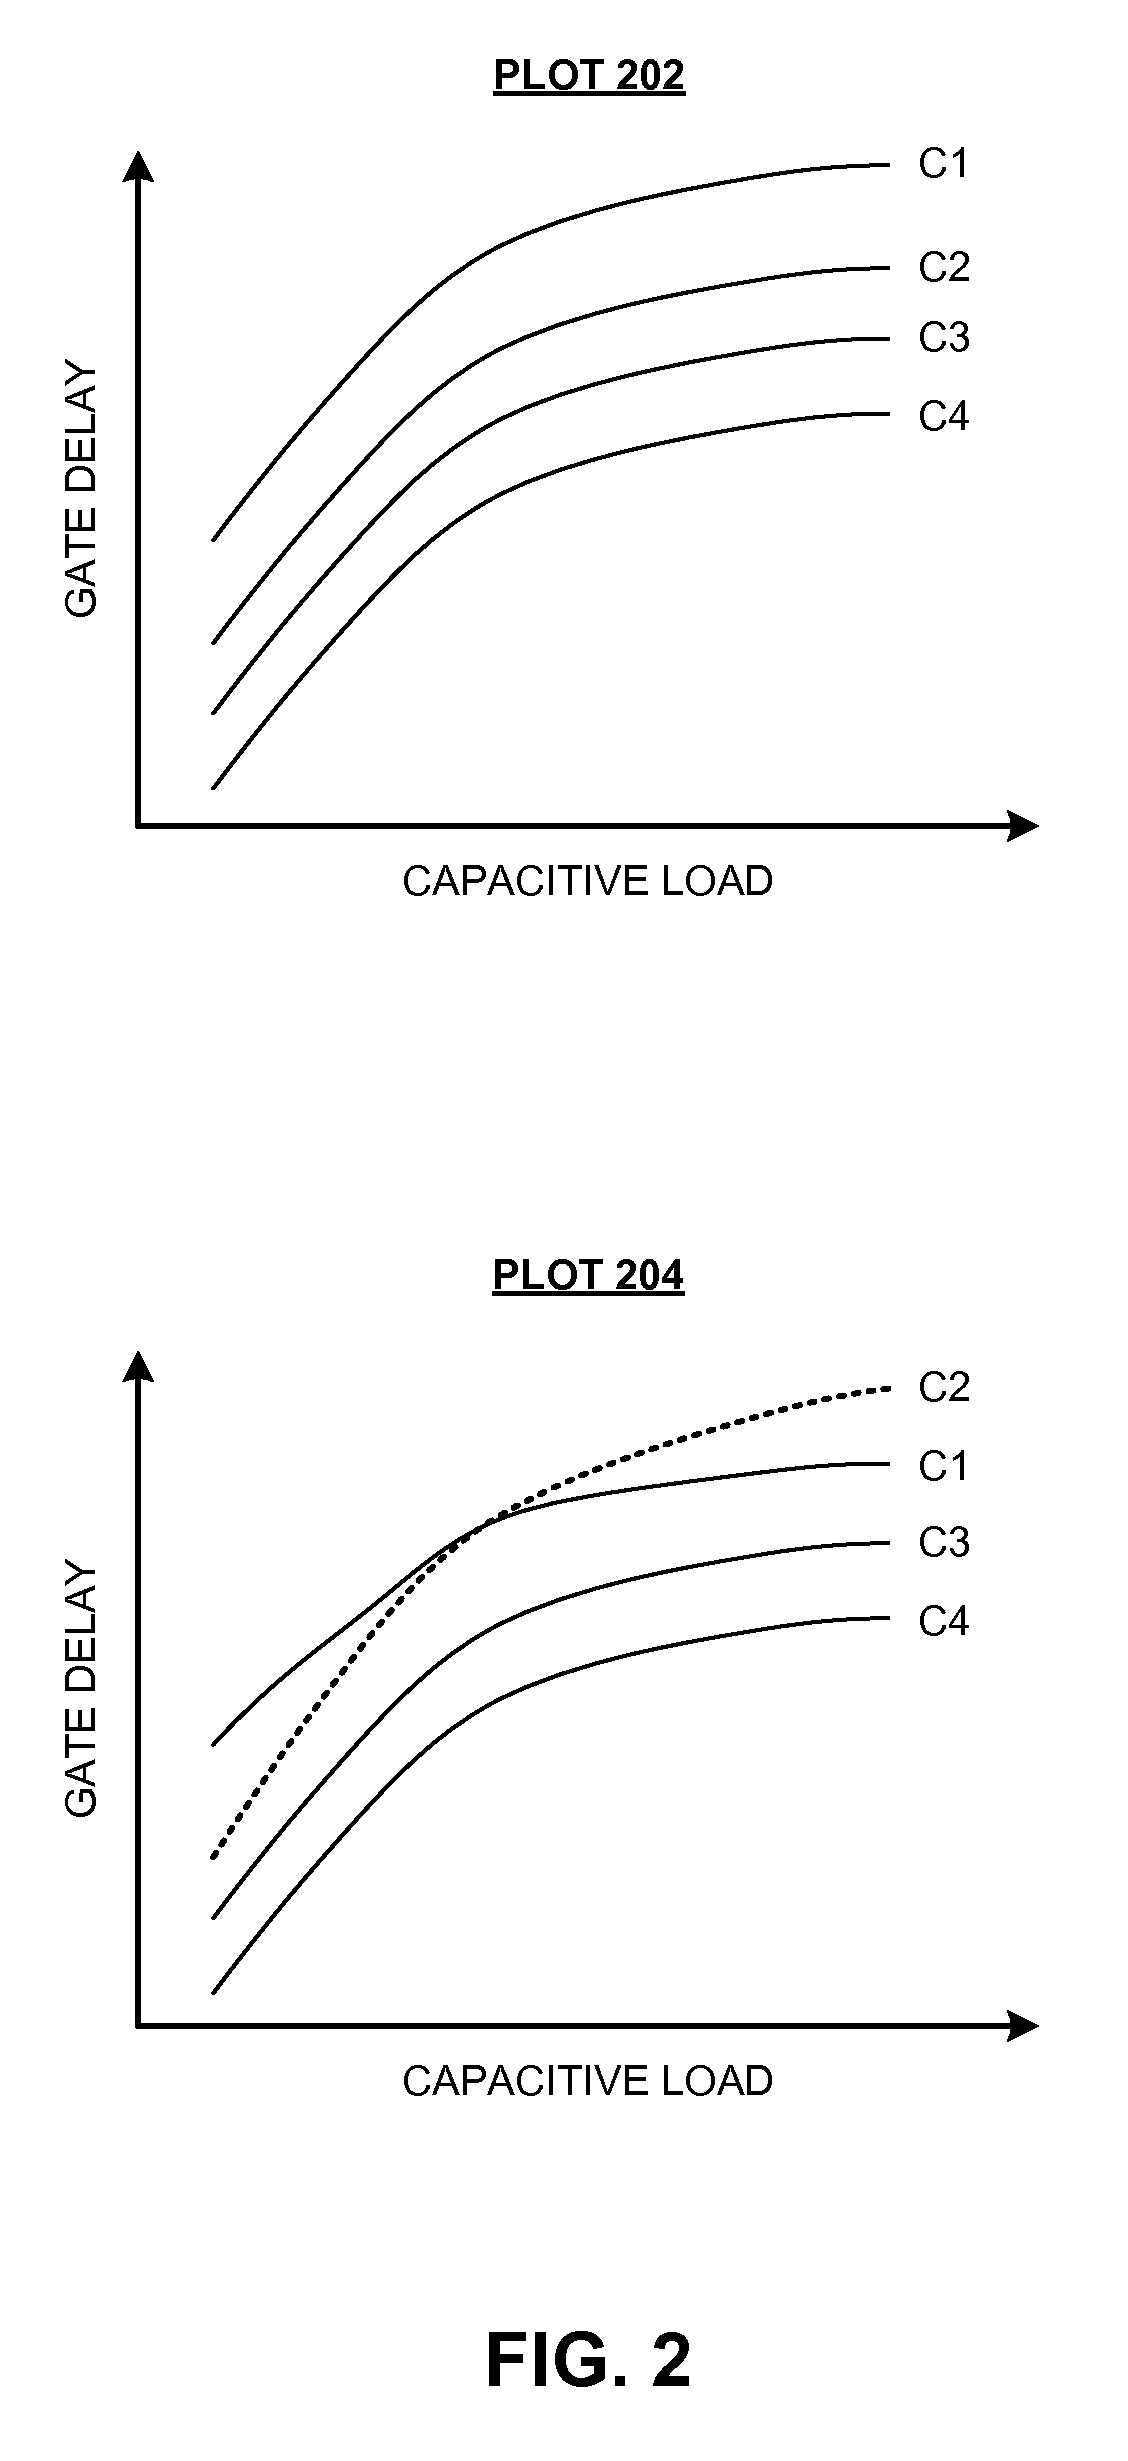 Performing scenario reduction using a dominance relation on a set of corners